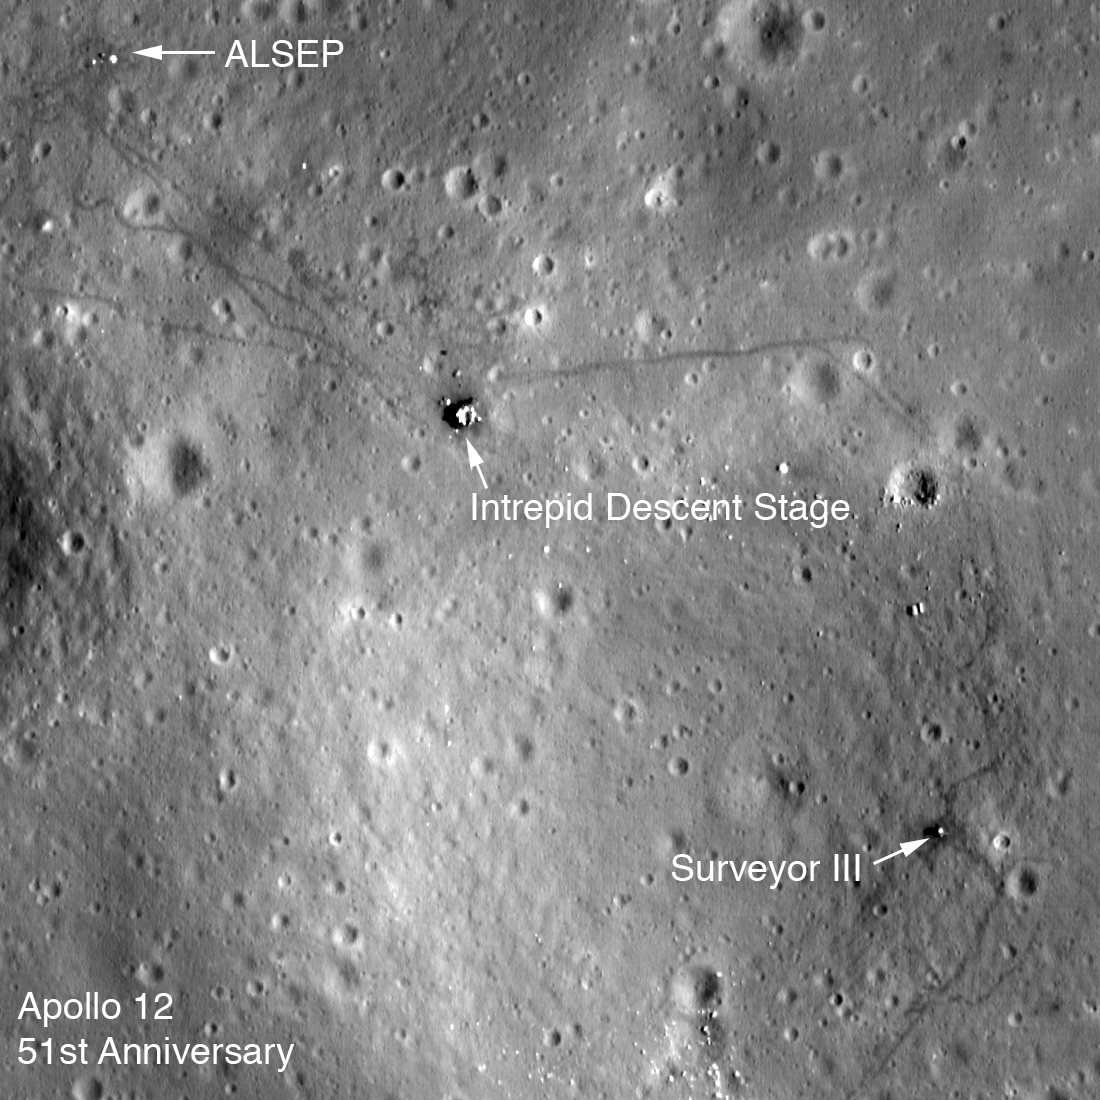 Apollo 12 landing site showing hardware and tracks